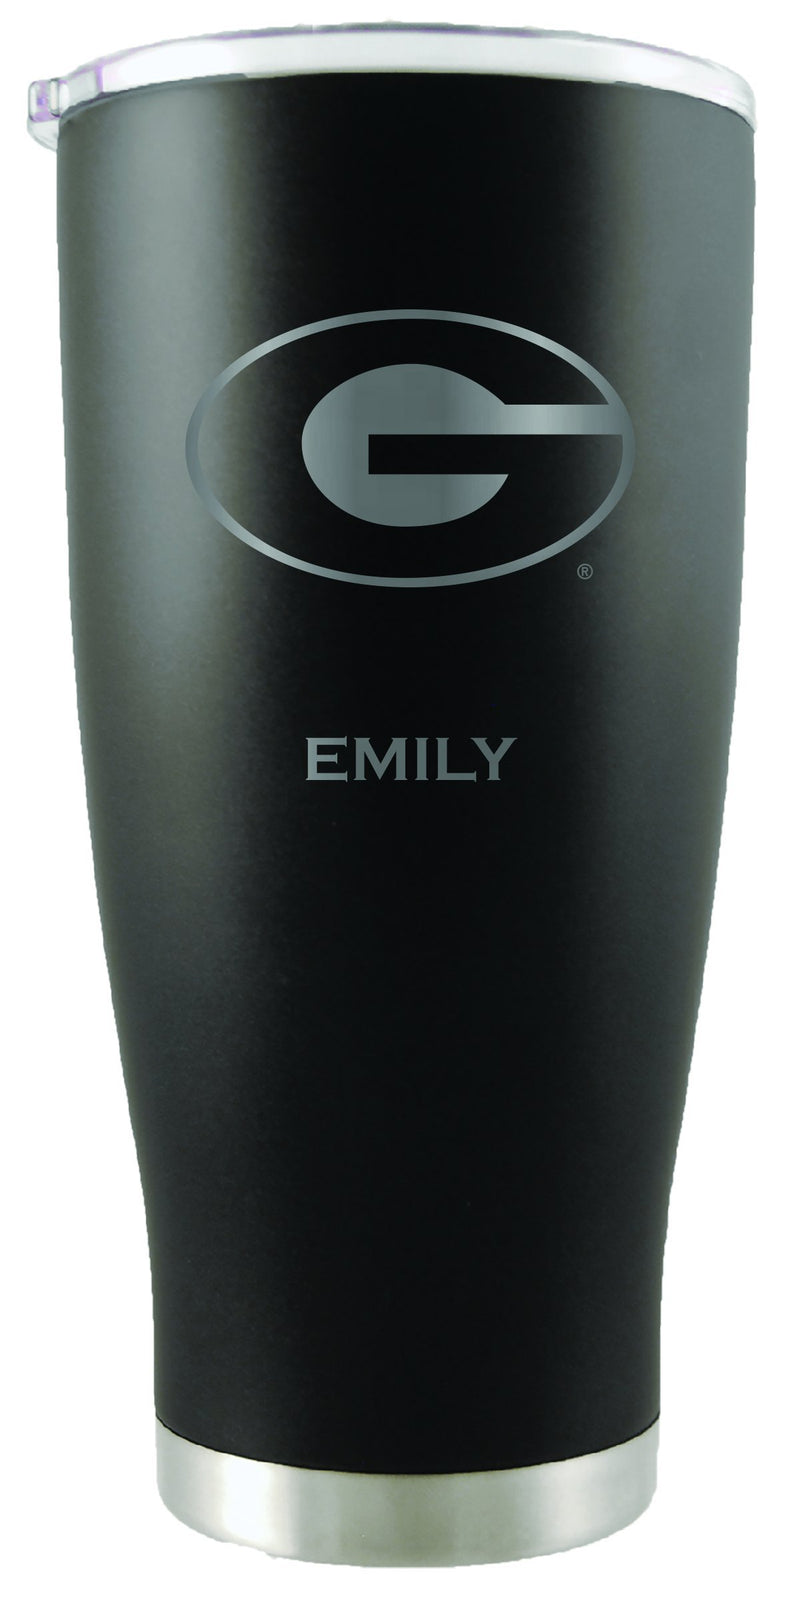 20oz Black Personalized Stainless Steel Tumbler | Georgia
COL, CurrentProduct, Drinkware_category_All, GA, Georgia Bulldogs, Personalized_Personalized
The Memory Company